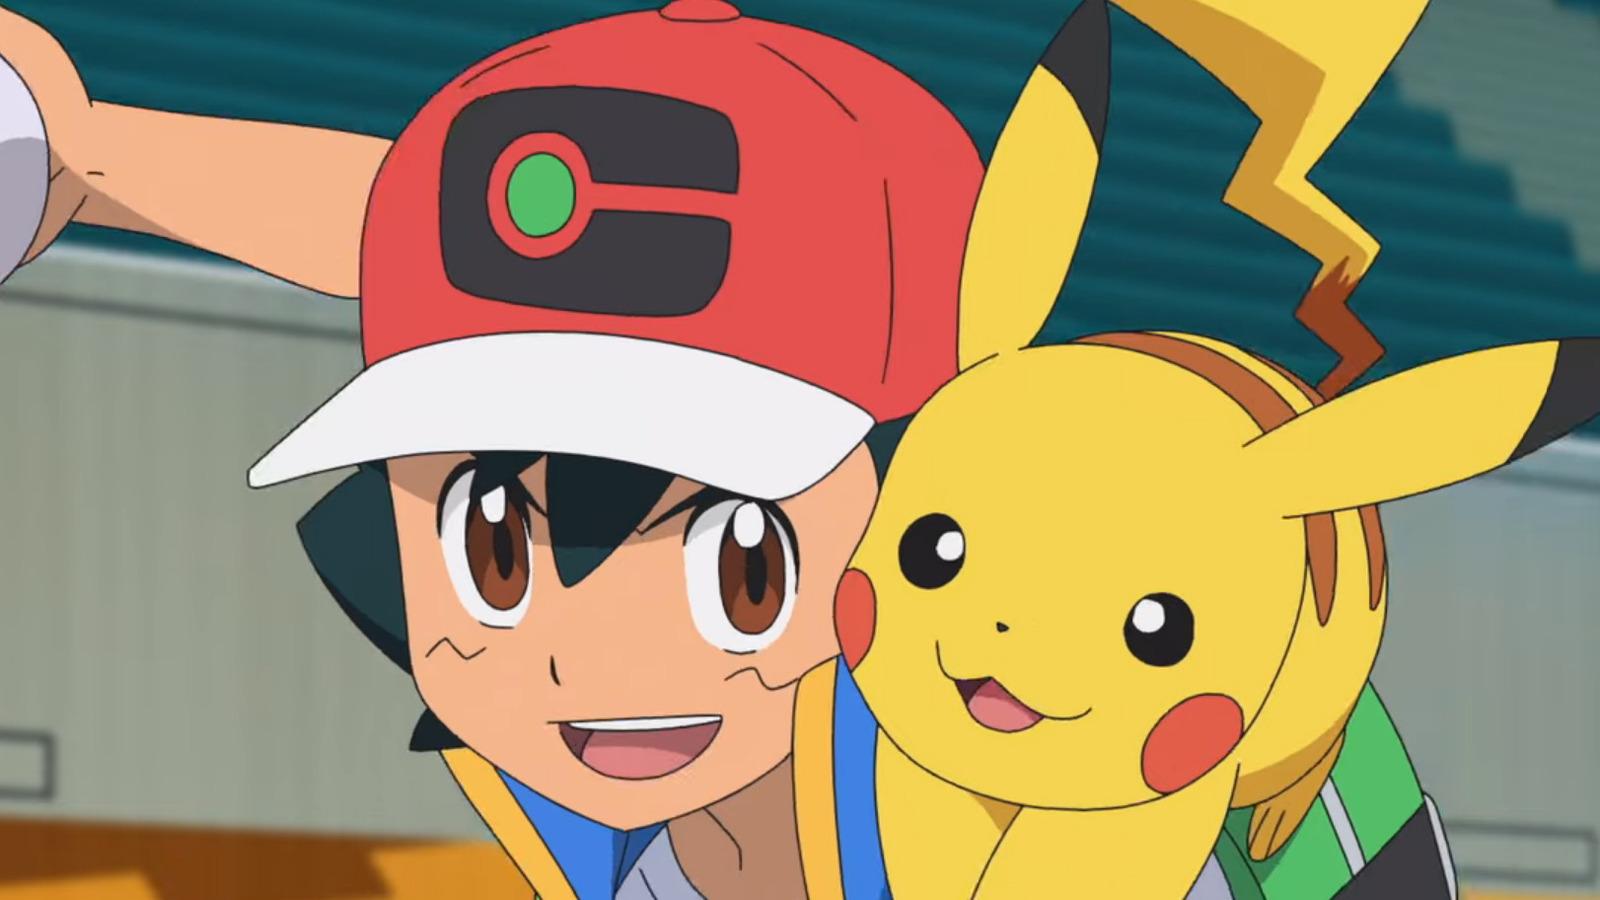 Pikachu And Ash To Leave Pokemon After 25 Years